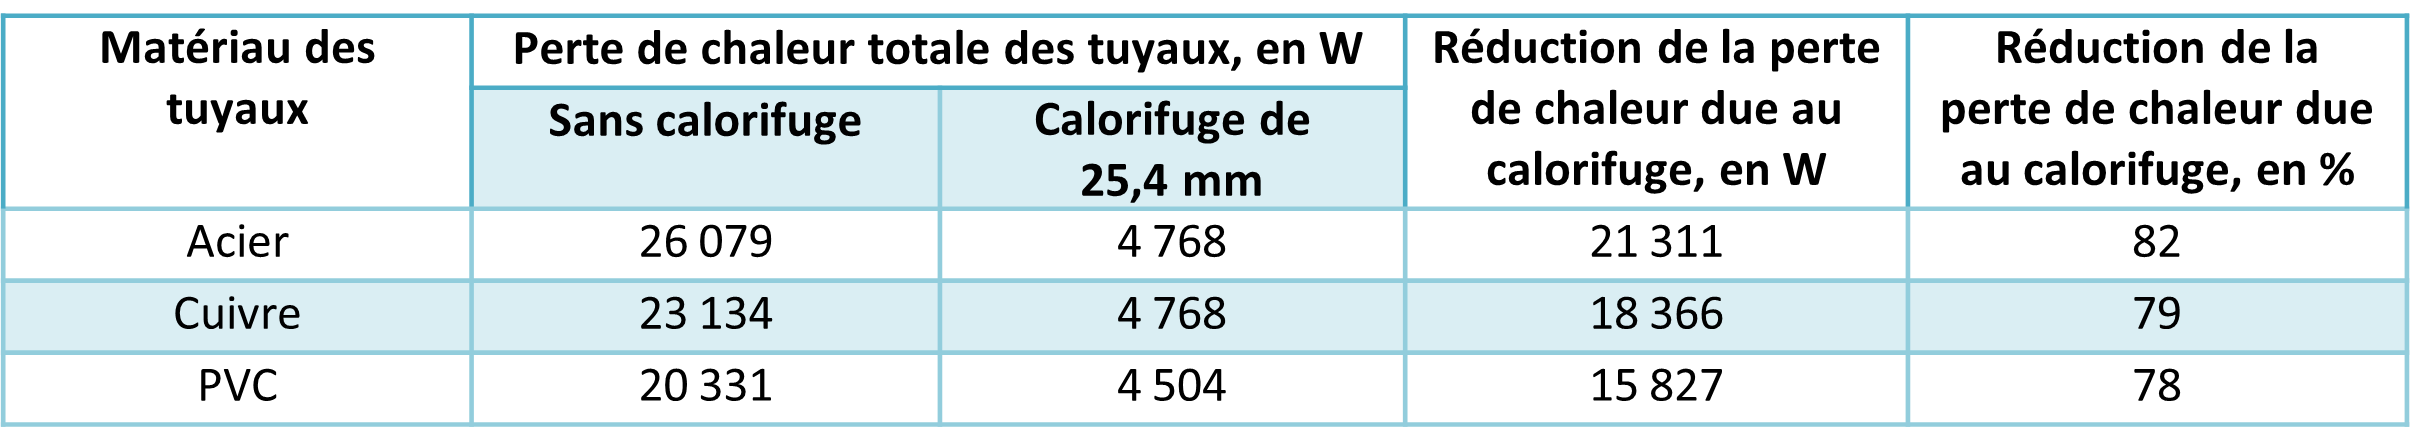 1860_table_2_fr.png